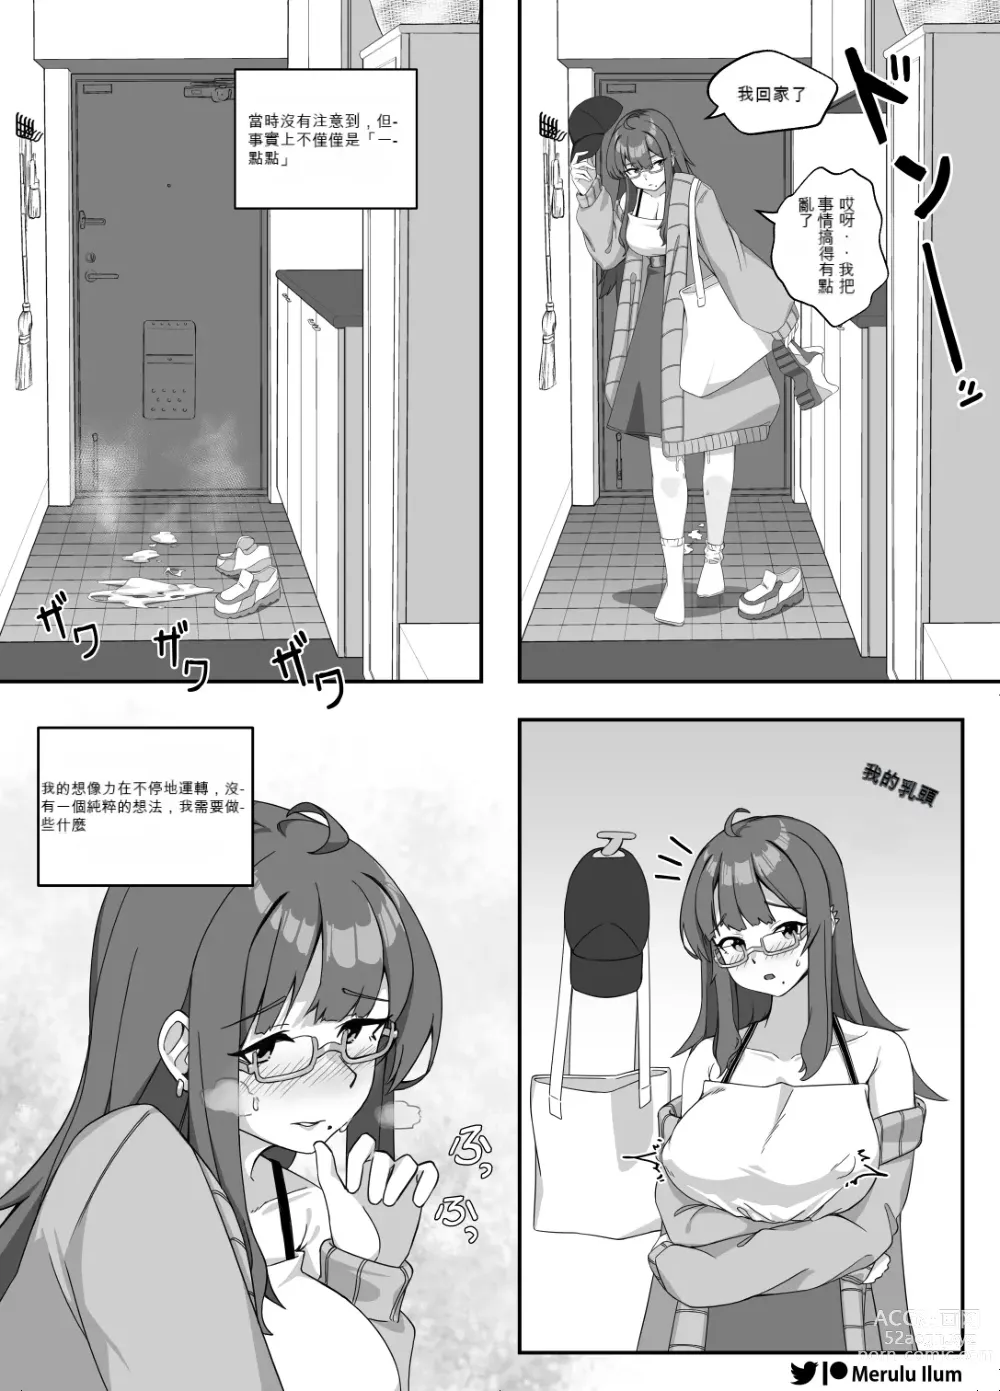 Page 4 of doujinshi Masturbation with a Giant Dick, Lets have fun!